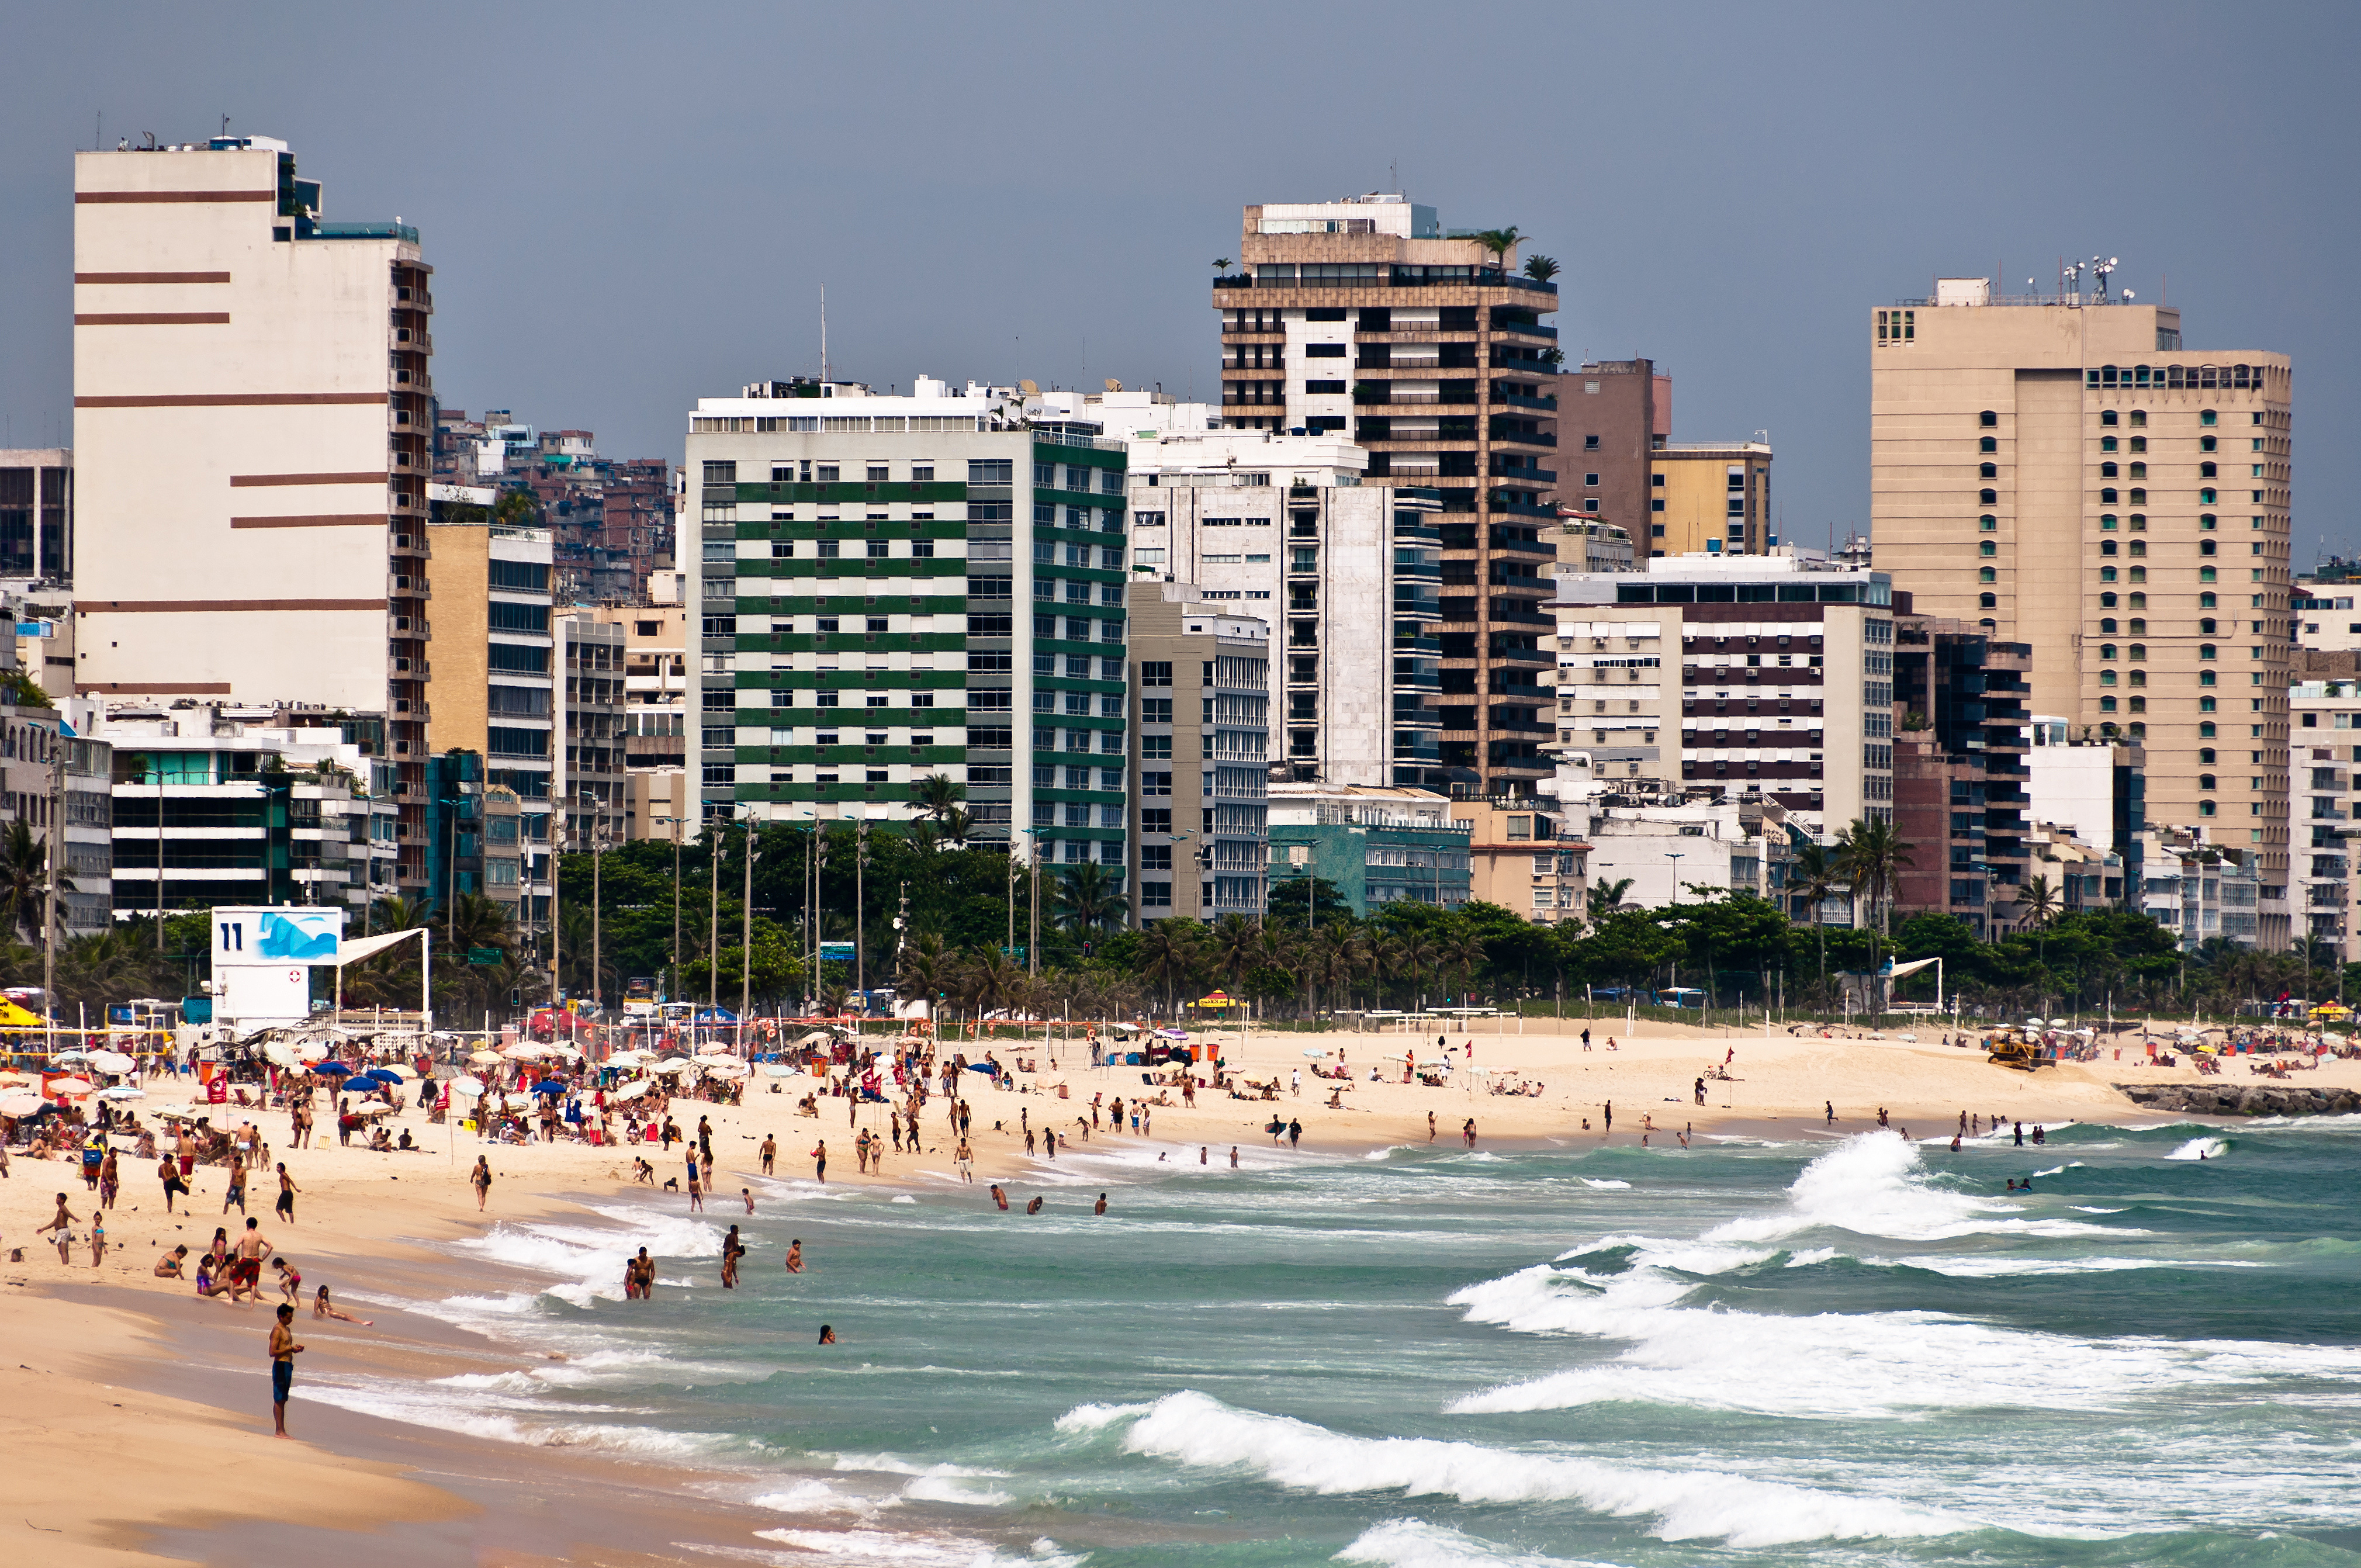 For generations, the jet-set have flocked to Rio de Janeiro's Ipanema Beach, a place to see and be seen.